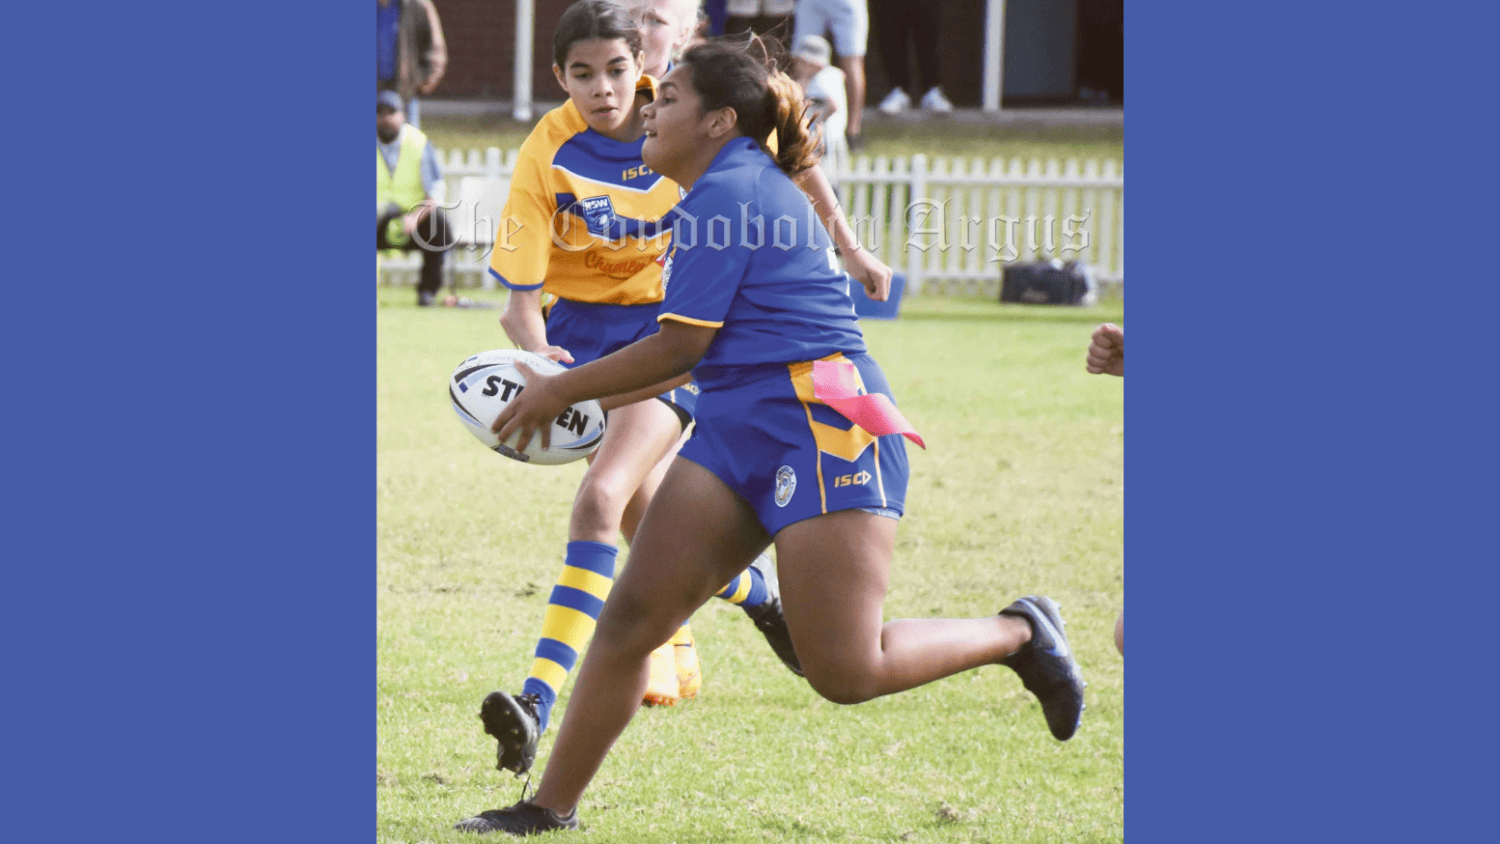 Condobolin’s Shayleen Coe showed skills and determination to be selected for the Lachlan District Junior Rugby League Development Under 14s League Tag Team. Congratulations Shayleen! This image was taken in 2022. Image Credit: Melissa Blewitt.